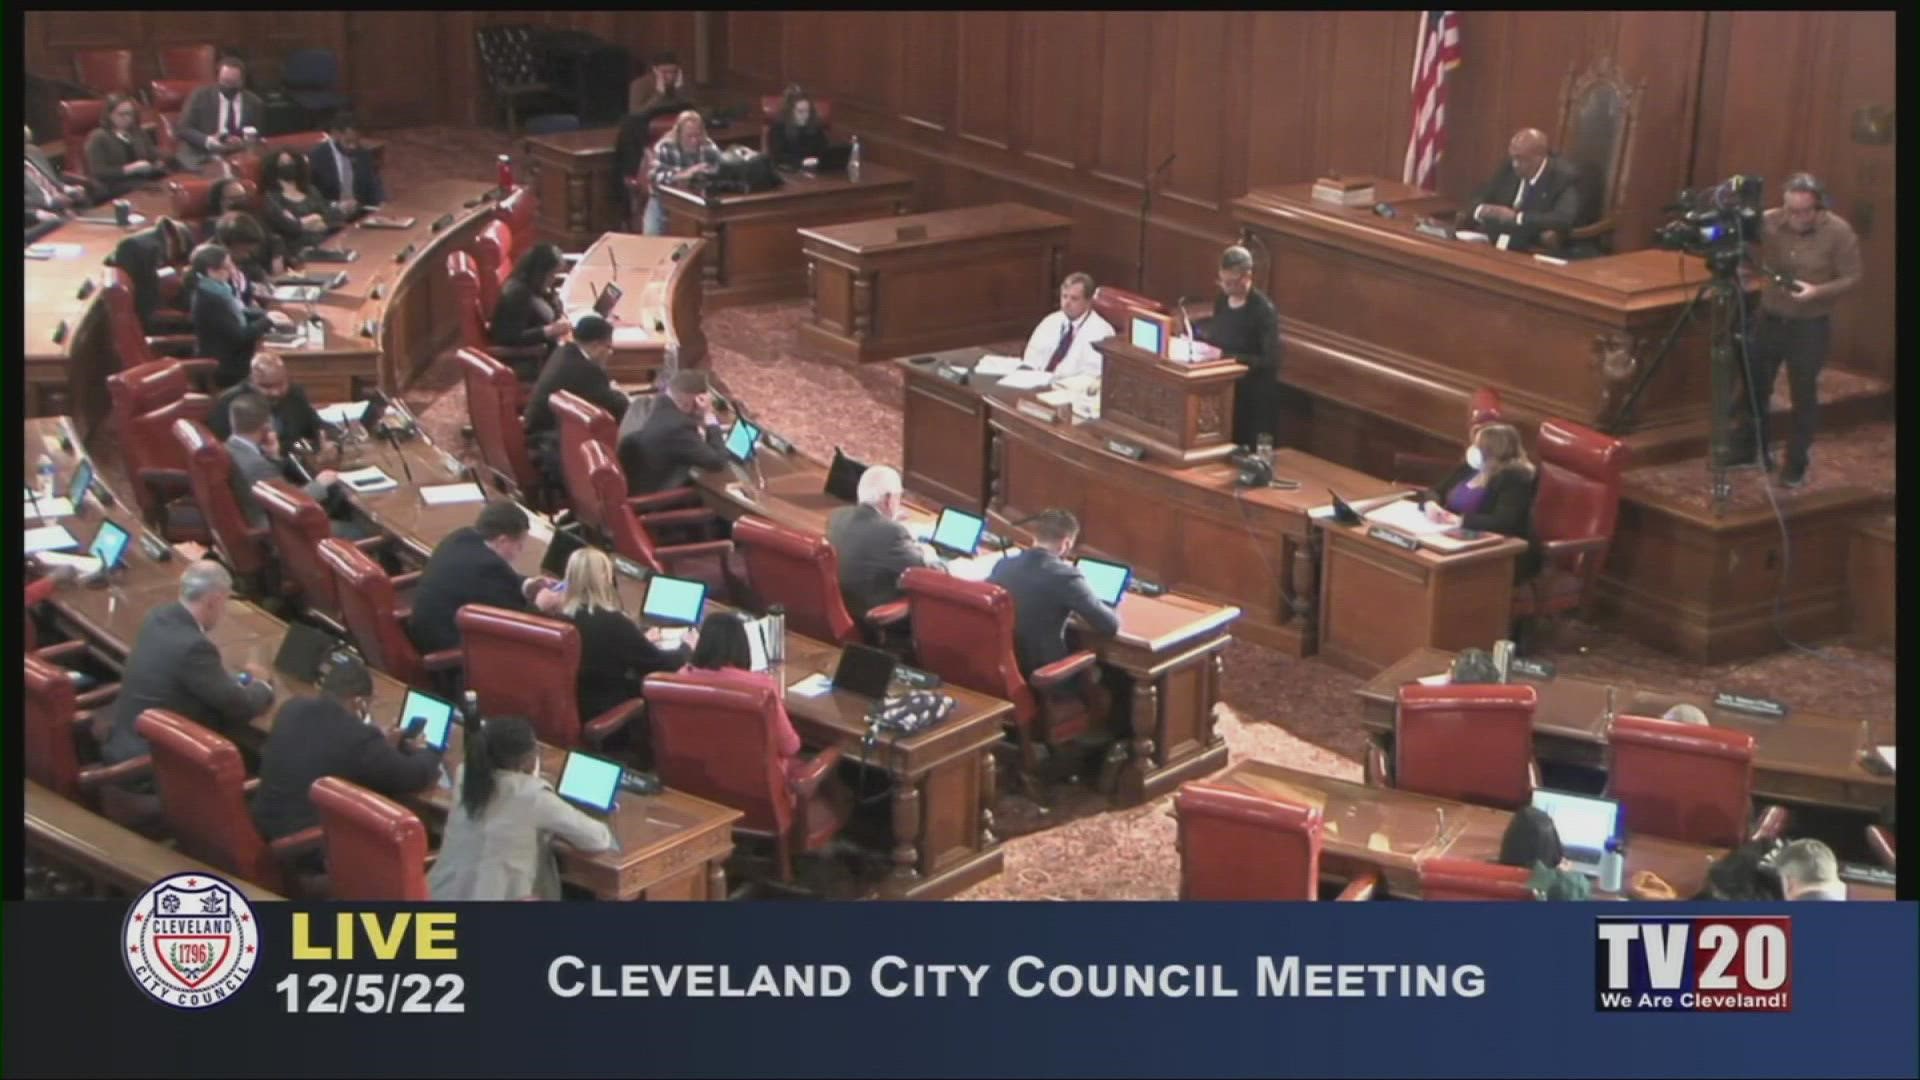 The commission, which will have powers including police misconduct discipline, is now in place just over a year after Cleveland voters passed Issue 24.